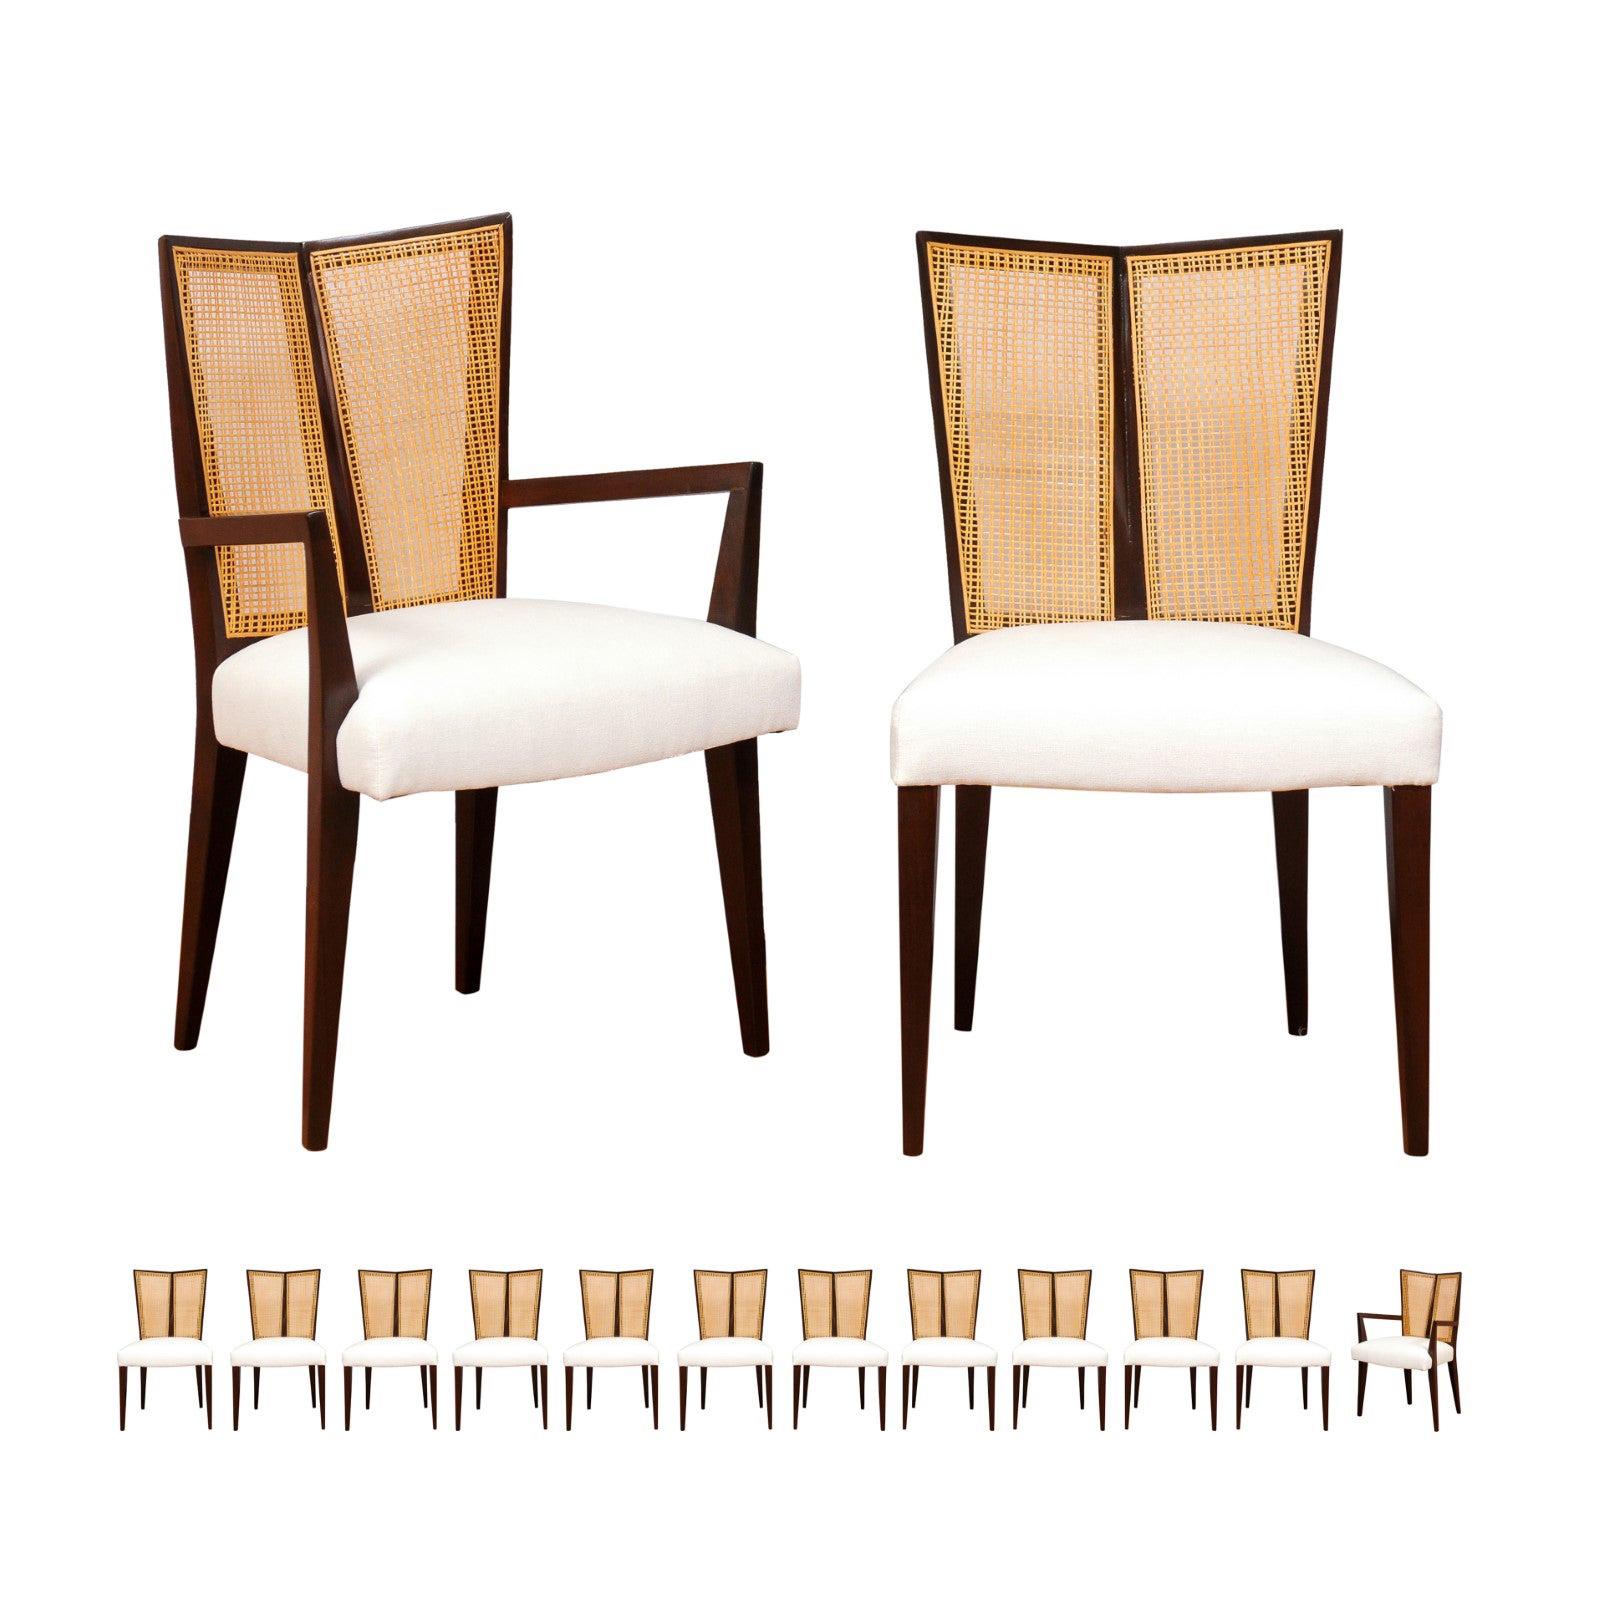 Breathtaking Set of 14 Modern V-Back Cane Chairs by Michael Taylor, circa 1960 For Sale